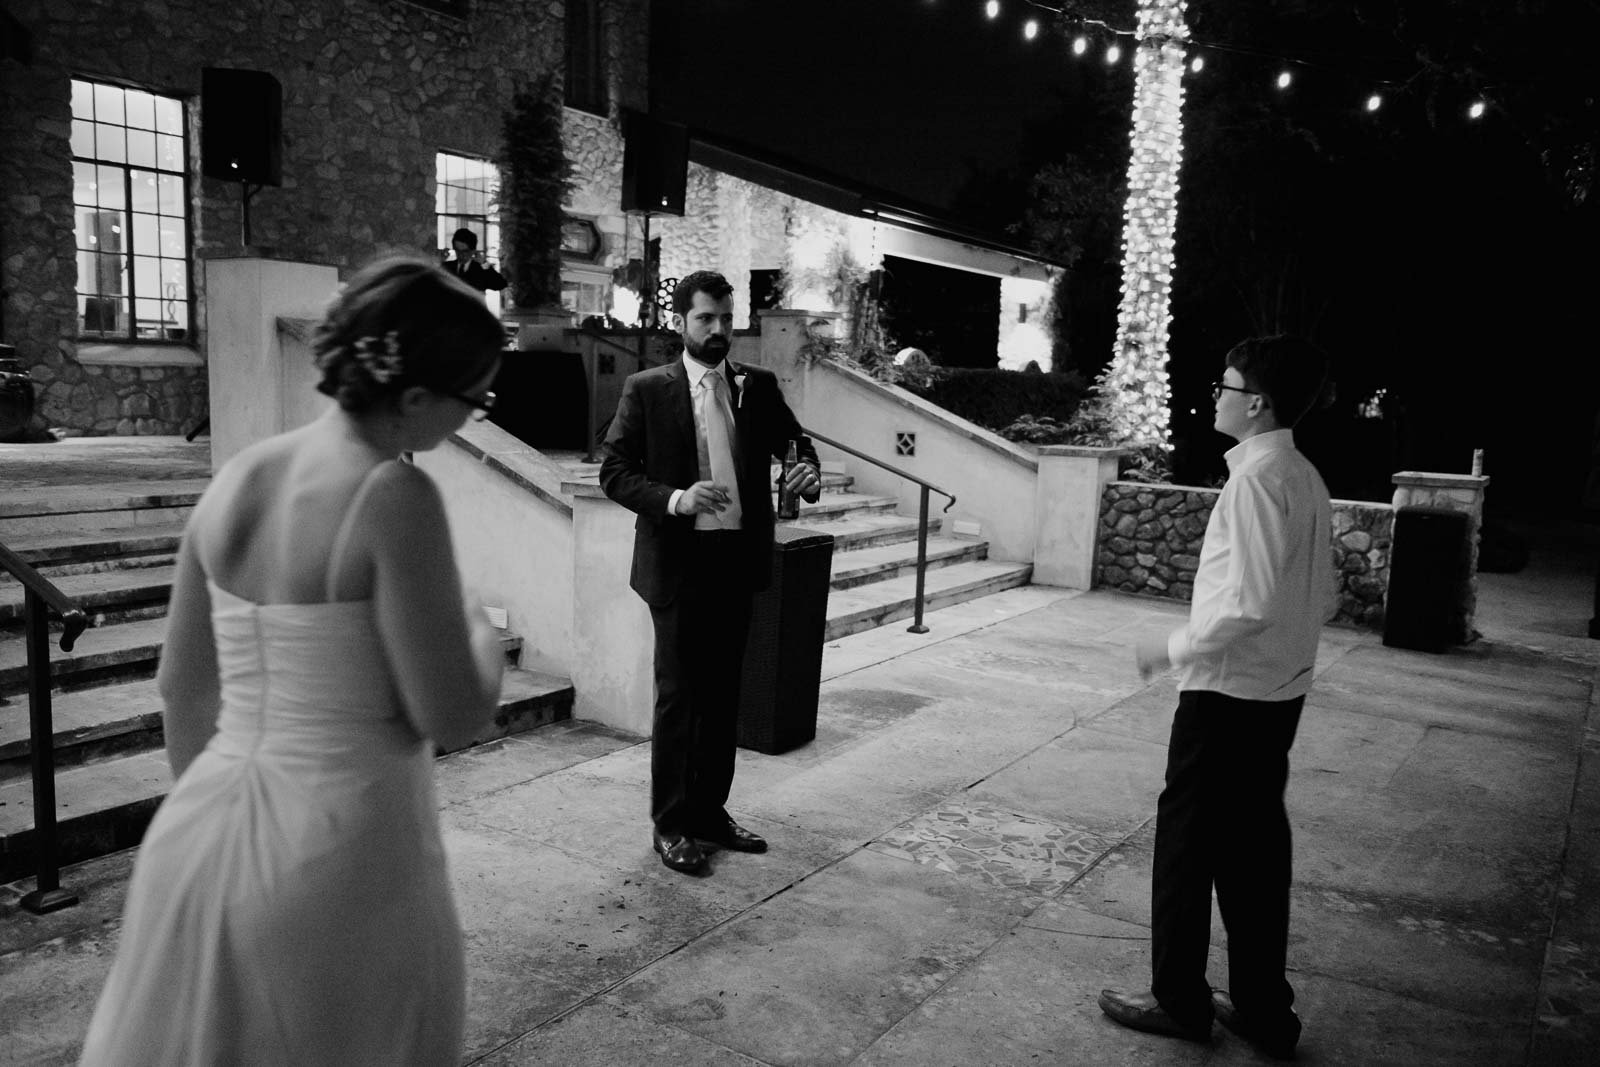 At this small wedding a few guests start to dance on the patio at the veranda under available light